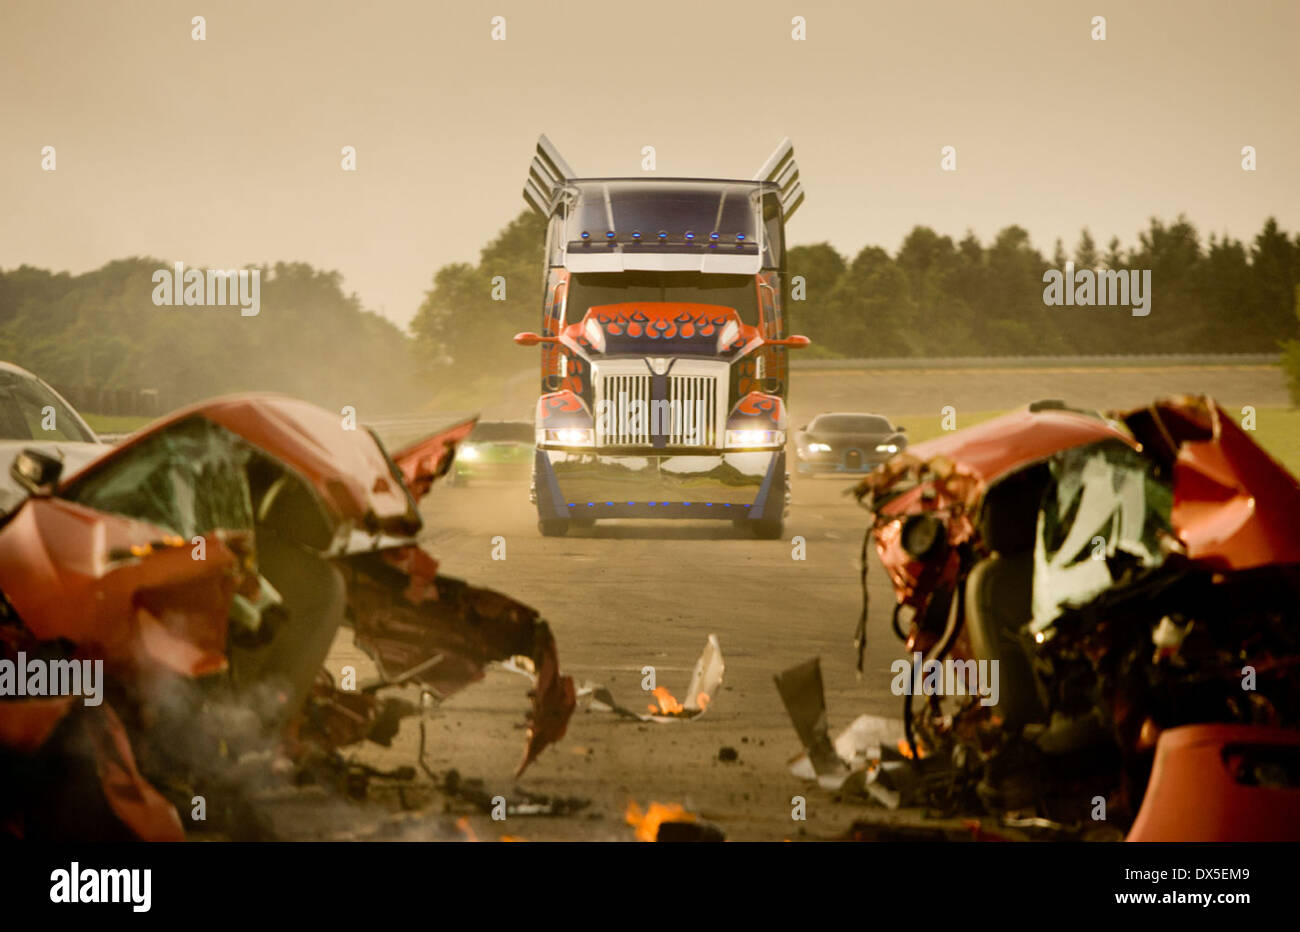 TRANSFORMERS AGE OF EXTINCTION (2014) MICHAEL BAY (DIR) MOVIESTORE COLLECTION LTD Stock Photo